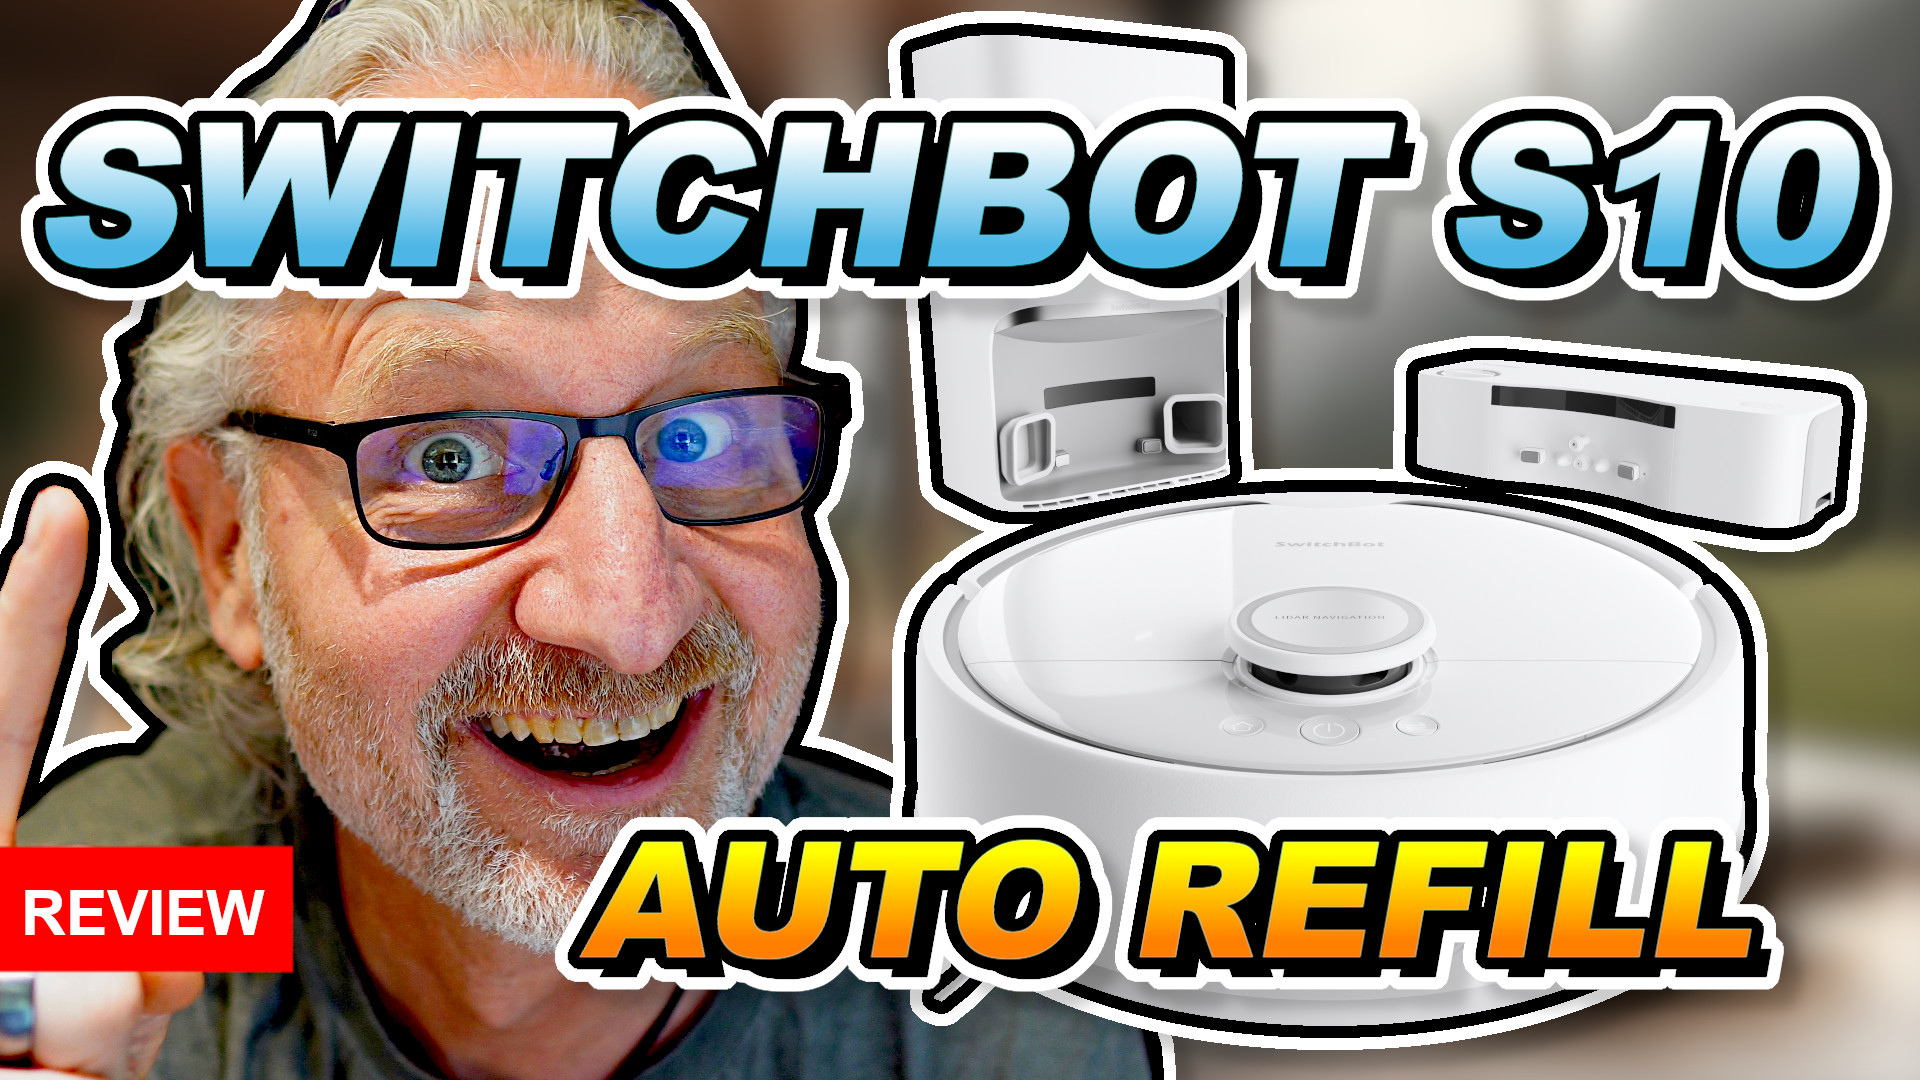 The Self-Refilling Robot Vacuum You’ll Love: Switchbot S10 Review